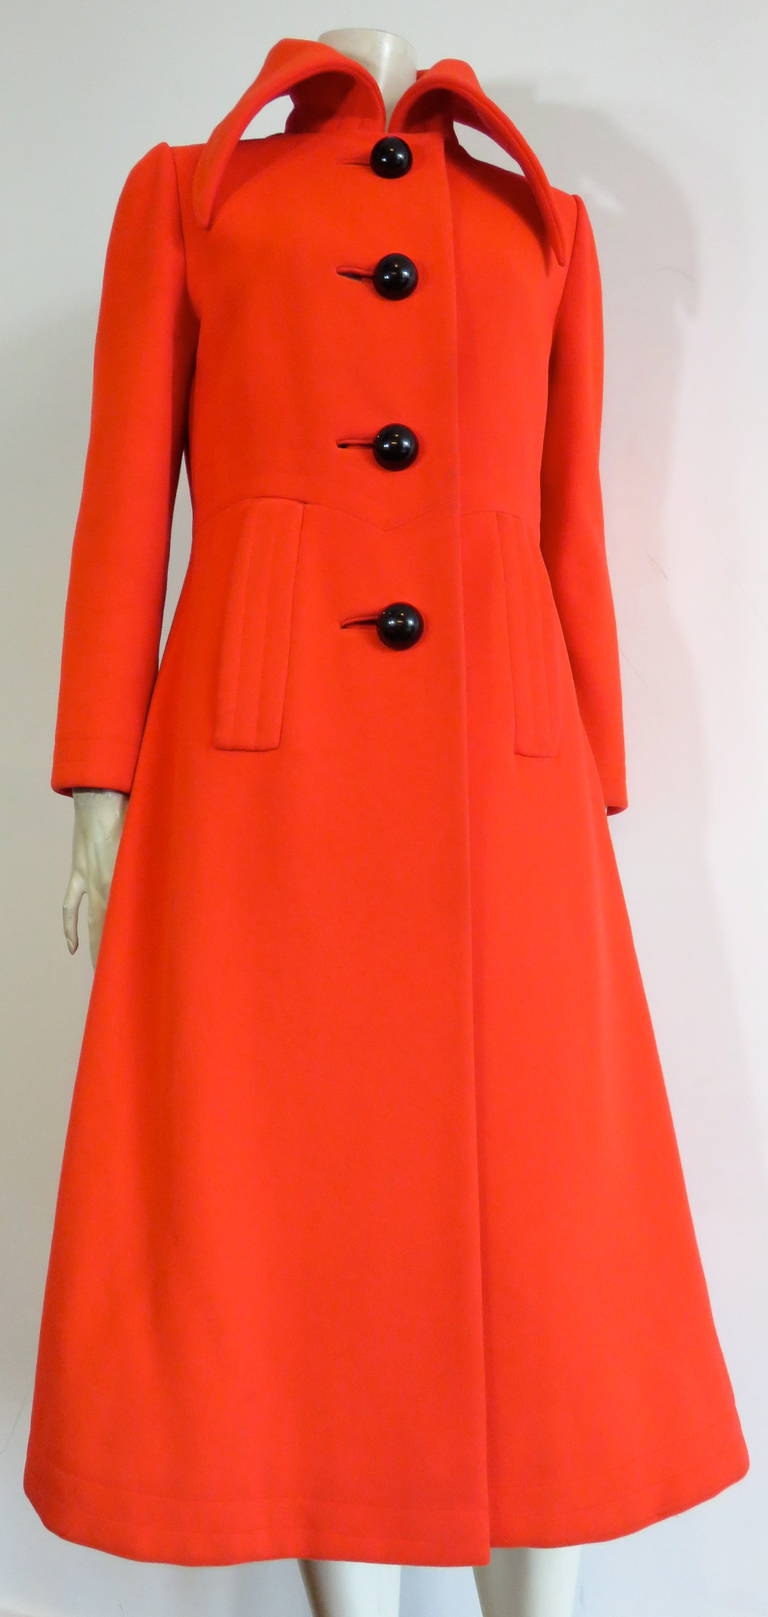 Amazing, 1960's PIERRE CARDIN Mod wool coat with oversized, black dome button closures.

The coat was designed by Pierre Cardin during the 1960's in France.

*The black leather belt in two of the photos is not original to the coat, but will be